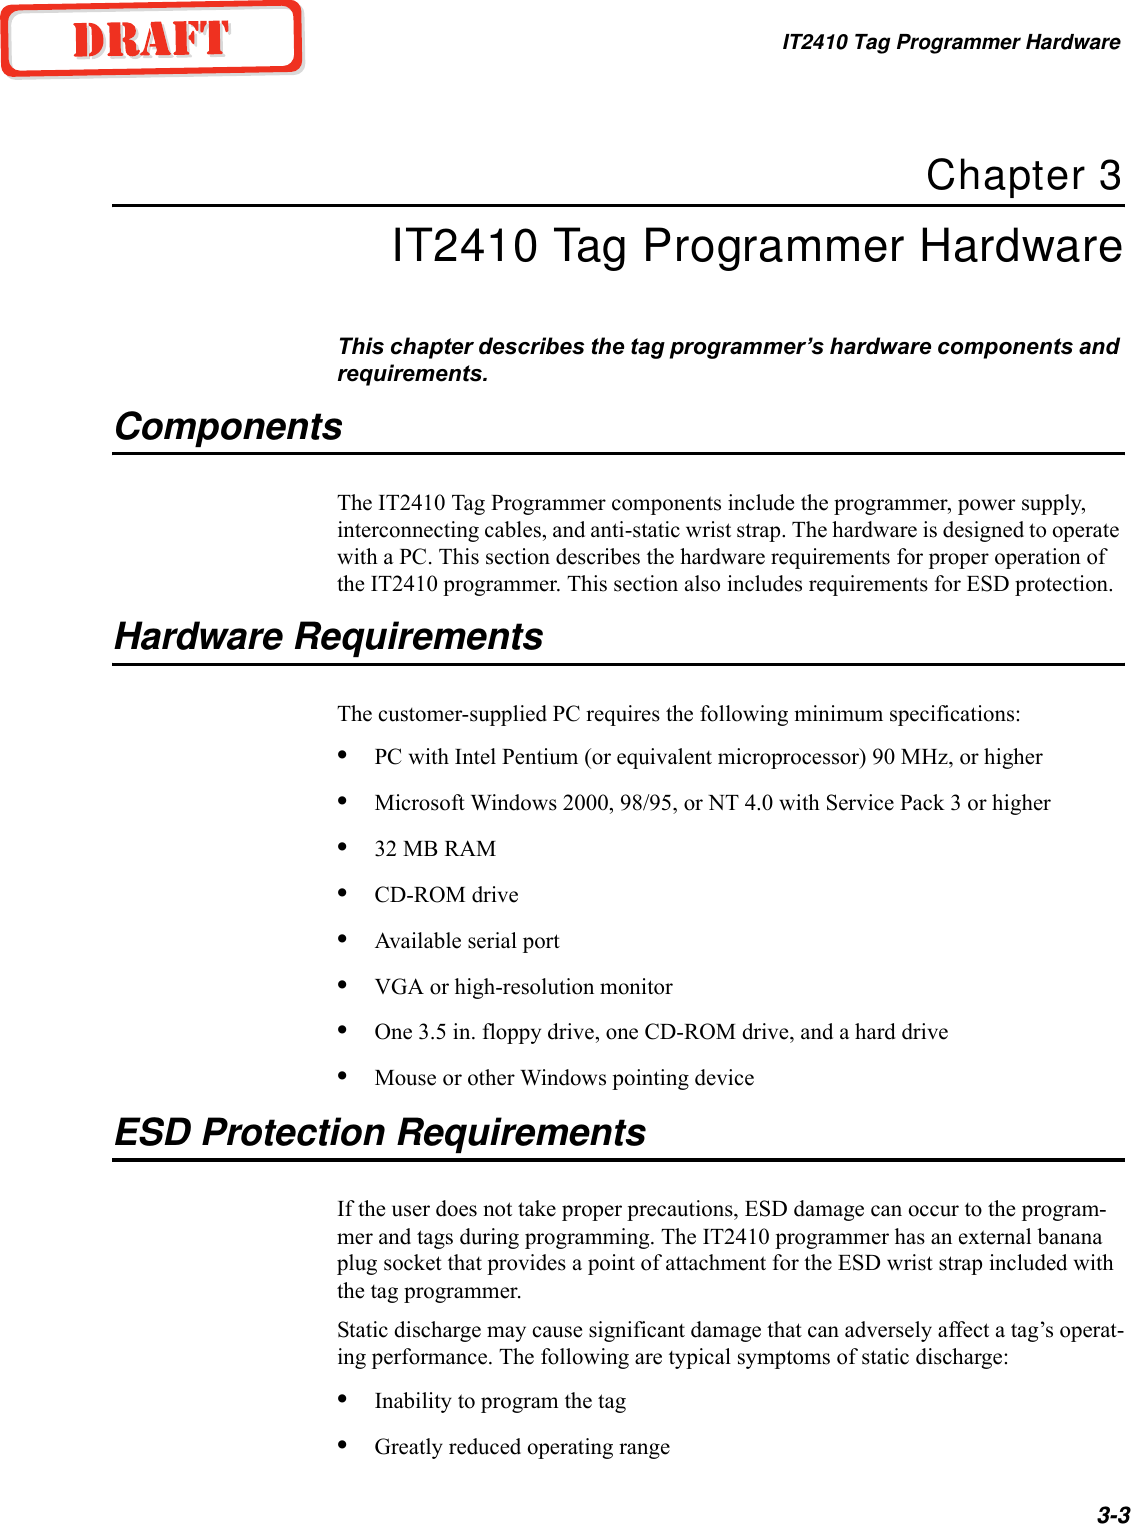 IT2410 Tag Programmer Hardware3-3Chapter 3IT2410 Tag Programmer HardwareThis chapter describes the tag programmer’s hardware components and requirements.ComponentsThe IT2410 Tag Programmer components include the programmer, power supply, interconnecting cables, and anti-static wrist strap. The hardware is designed to operate with a PC. This section describes the hardware requirements for proper operation of the IT2410 programmer. This section also includes requirements for ESD protection.Hardware RequirementsThe customer-supplied PC requires the following minimum specifications:•PC with Intel Pentium (or equivalent microprocessor) 90 MHz, or higher•Microsoft Windows 2000, 98/95, or NT 4.0 with Service Pack 3 or higher•32 MB RAM•CD-ROM drive•Available serial port•VGA or high-resolution monitor•One 3.5 in. floppy drive, one CD-ROM drive, and a hard drive•Mouse or other Windows pointing deviceESD Protection RequirementsIf the user does not take proper precautions, ESD damage can occur to the program-mer and tags during programming. The IT2410 programmer has an external banana plug socket that provides a point of attachment for the ESD wrist strap included with the tag programmer.Static discharge may cause significant damage that can adversely affect a tag’s operat-ing performance. The following are typical symptoms of static discharge:•Inability to program the tag•Greatly reduced operating range